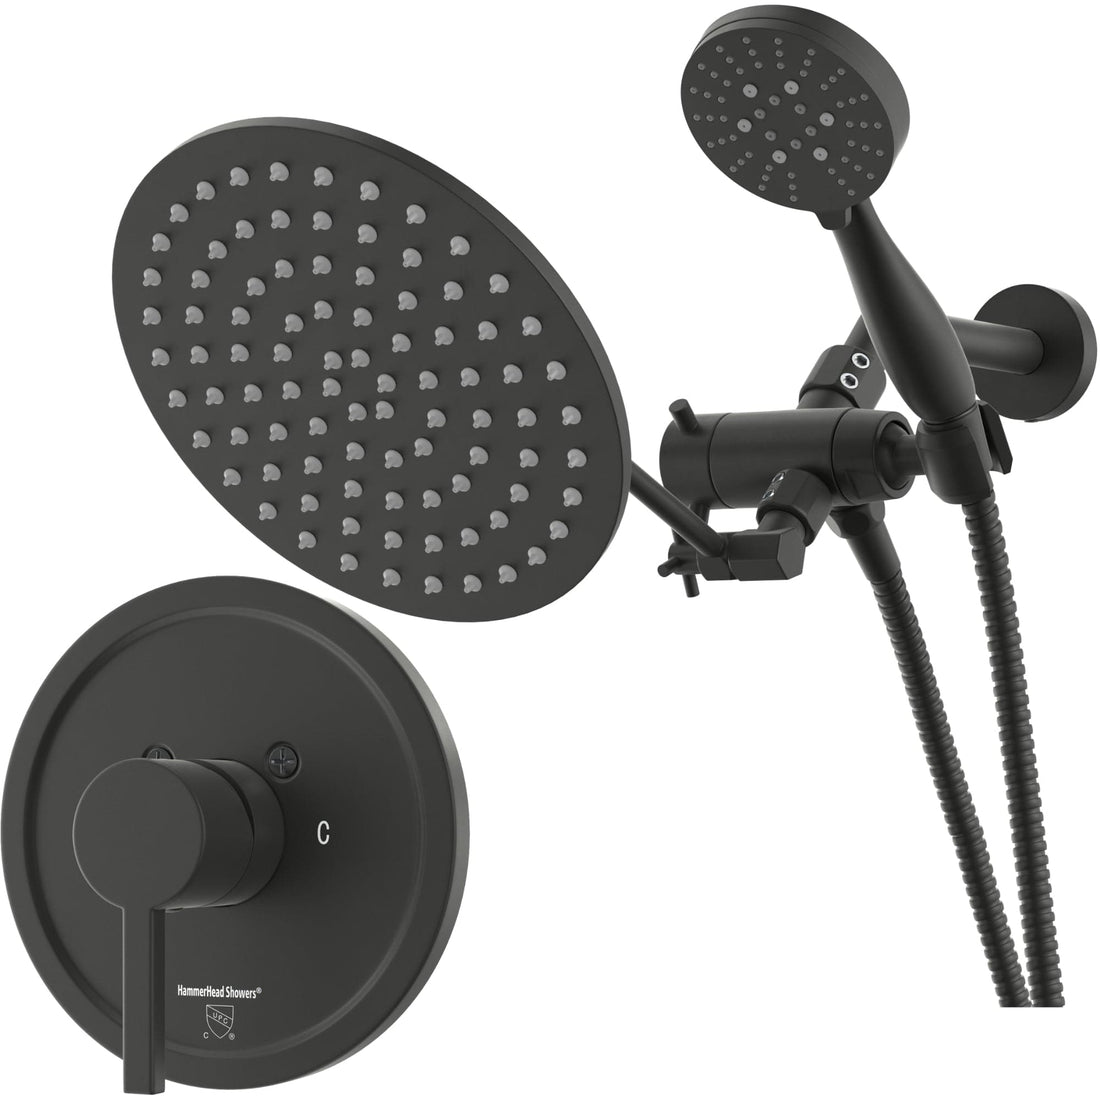 Main Image All Metal Dual Shower Head with Adjustable Arm - Complete Shower System with Valve and Trim Matte Black  / 2.5 - The Shower Head Store